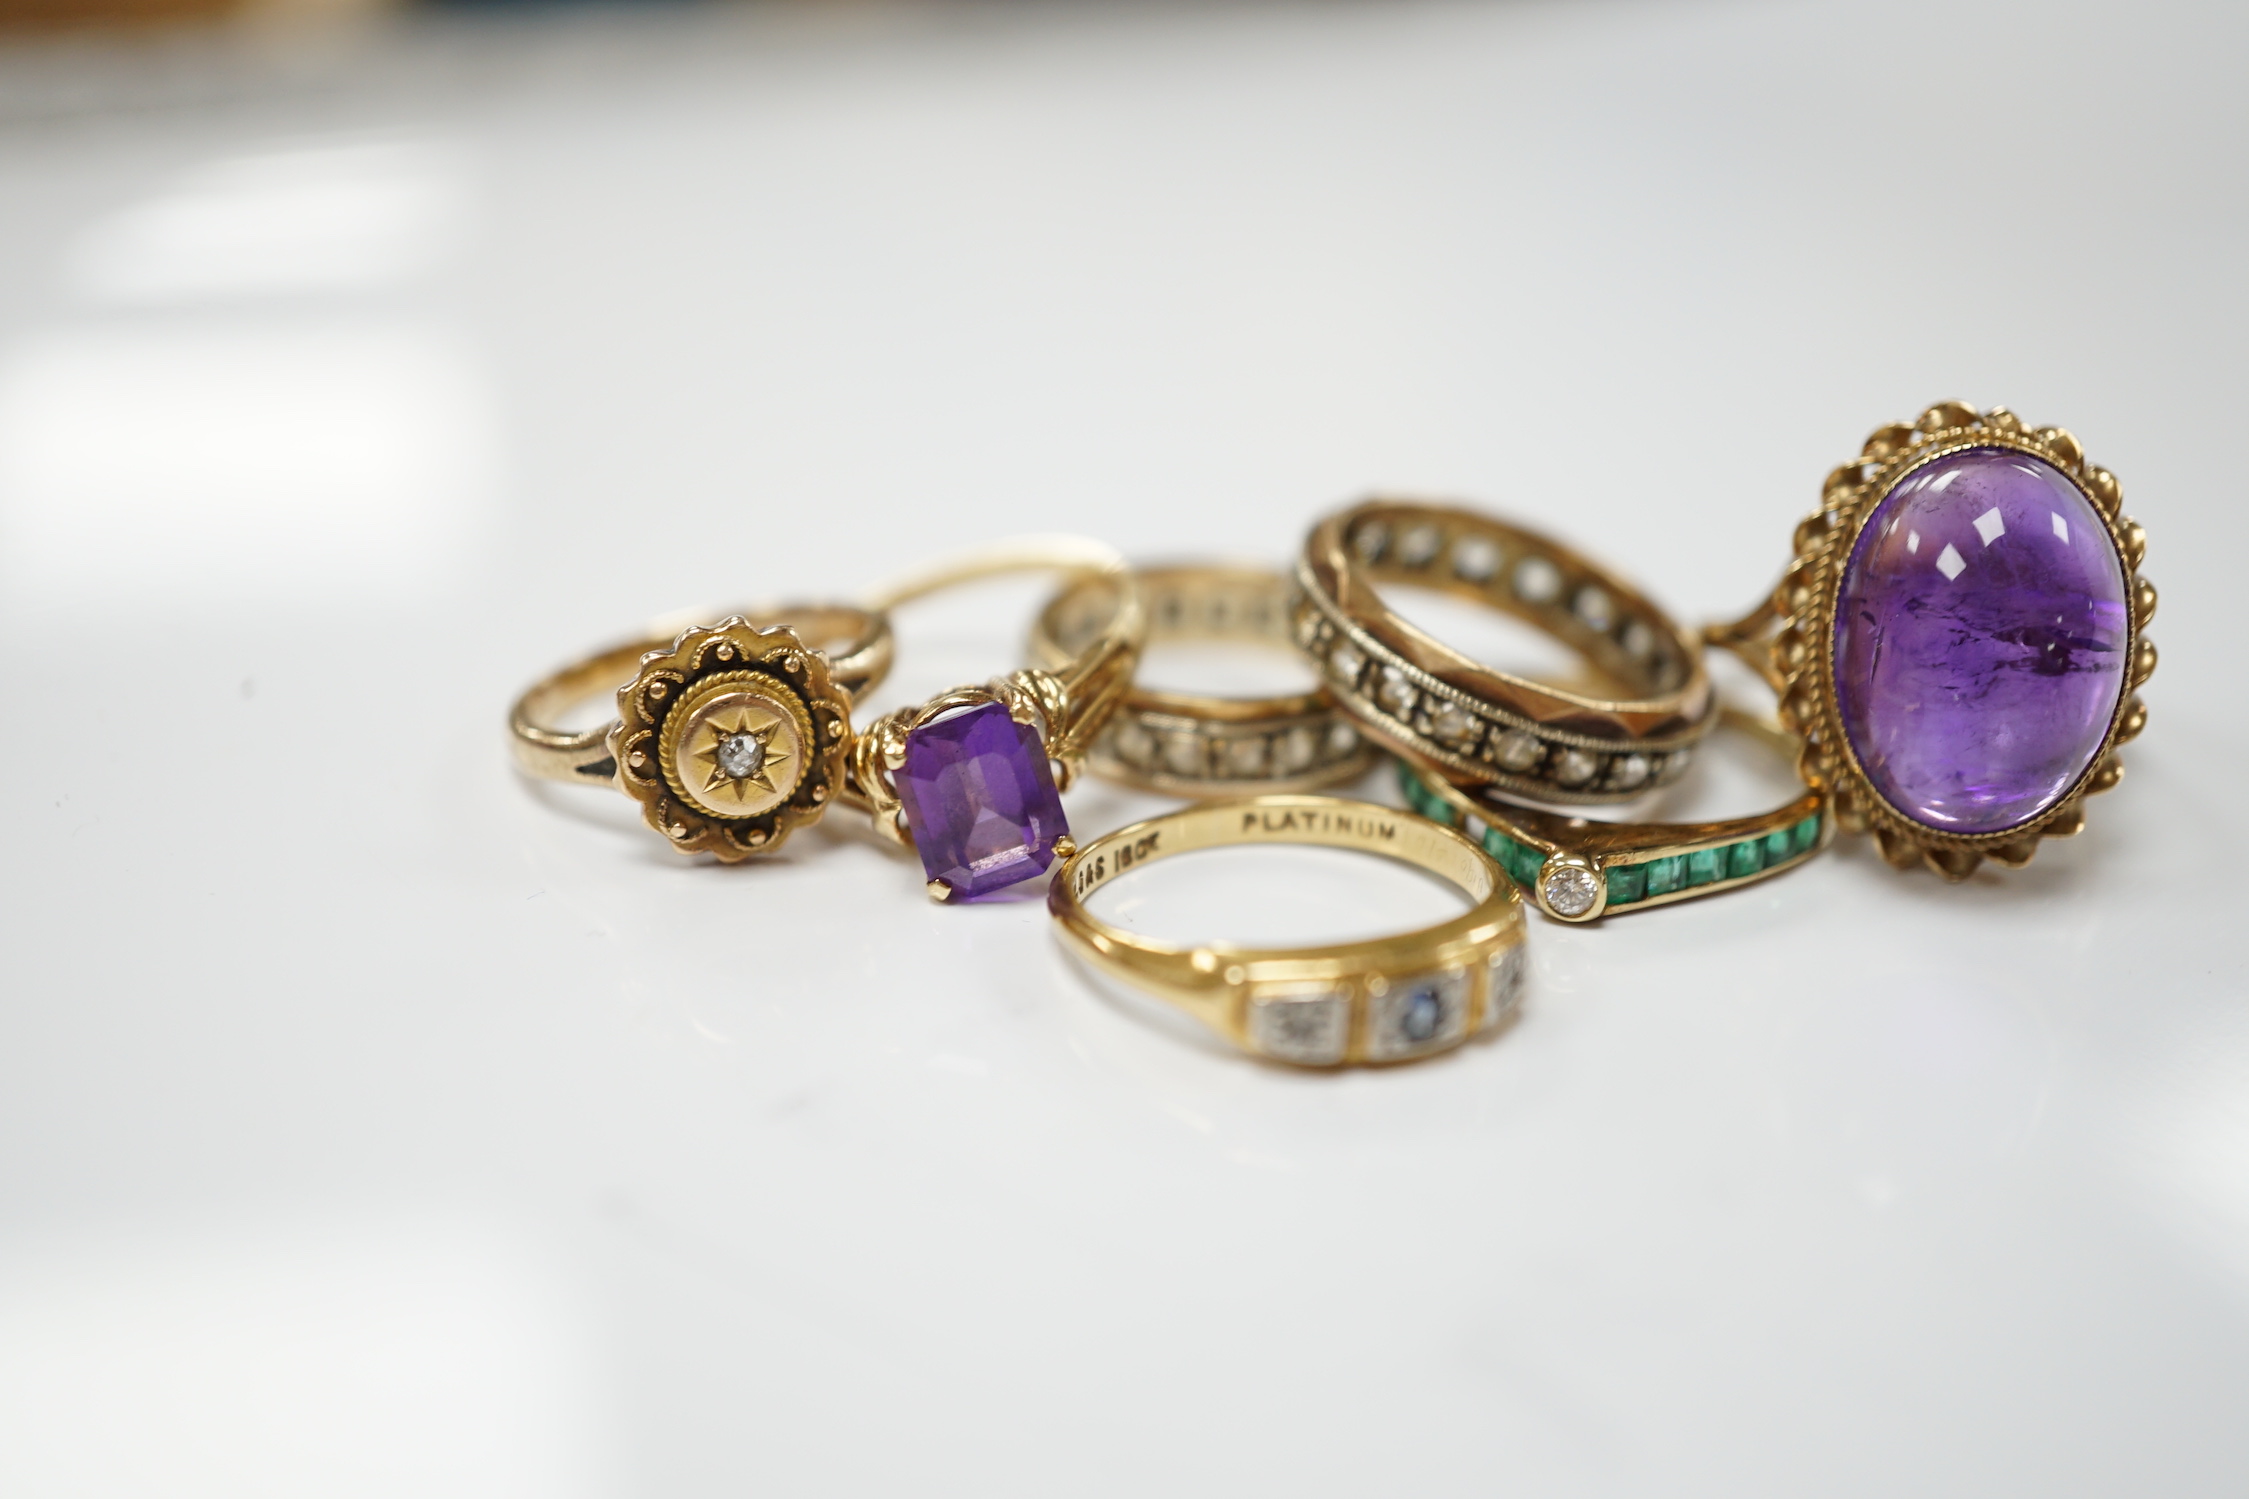 Five assorted 9ct and gems set rings including cabochon amethyst, gross weight 15.1 grams, an 18ct and gem set ring and a 585 emerald and diamond set ring